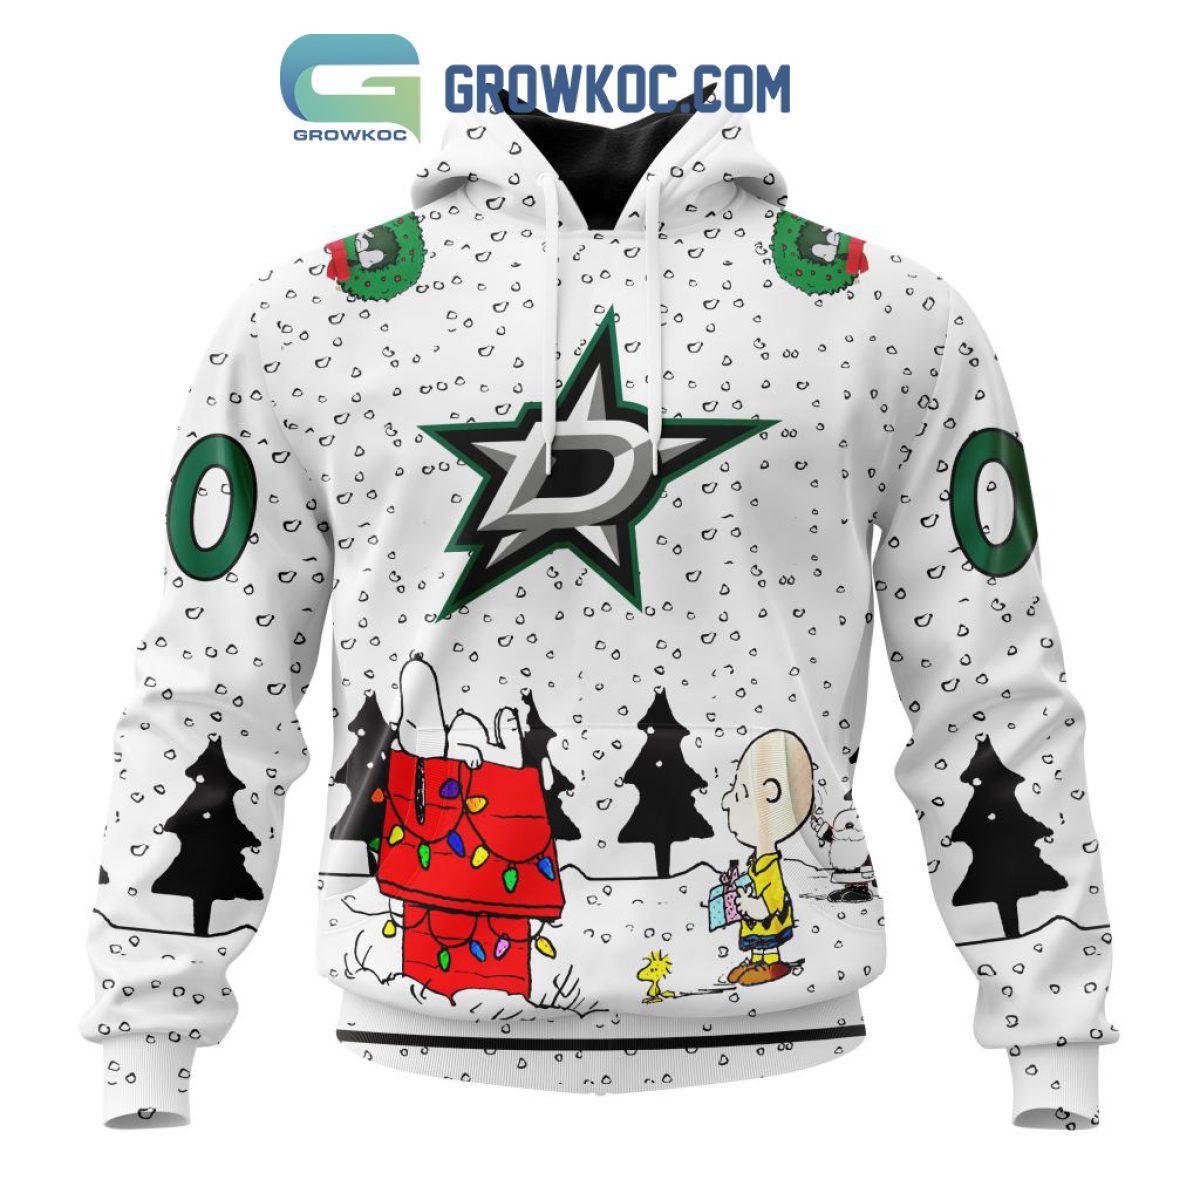 Dallas Stars NHL Mix Snoopy Peanuts Christmas Personalized Hoodie